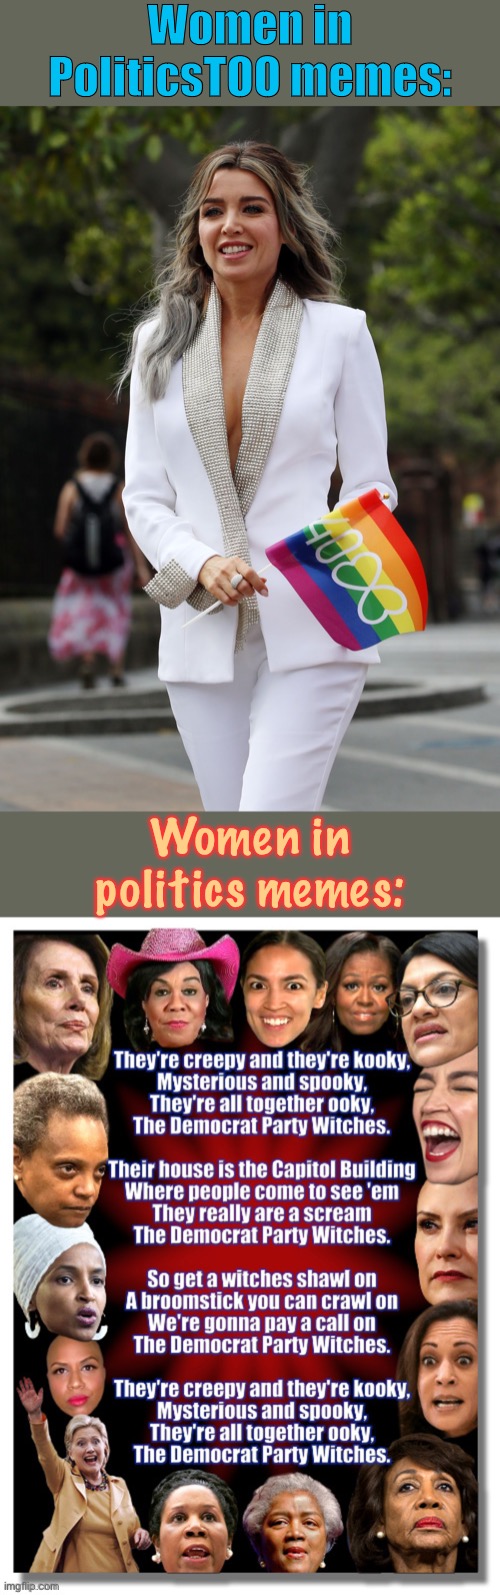 Things that make you go hmmm | Women in PoliticsTOO memes:; Women in politics memes: | image tagged in dannii lgbtq,politics,sexism,misogyny,sexist,memes about memes | made w/ Imgflip meme maker